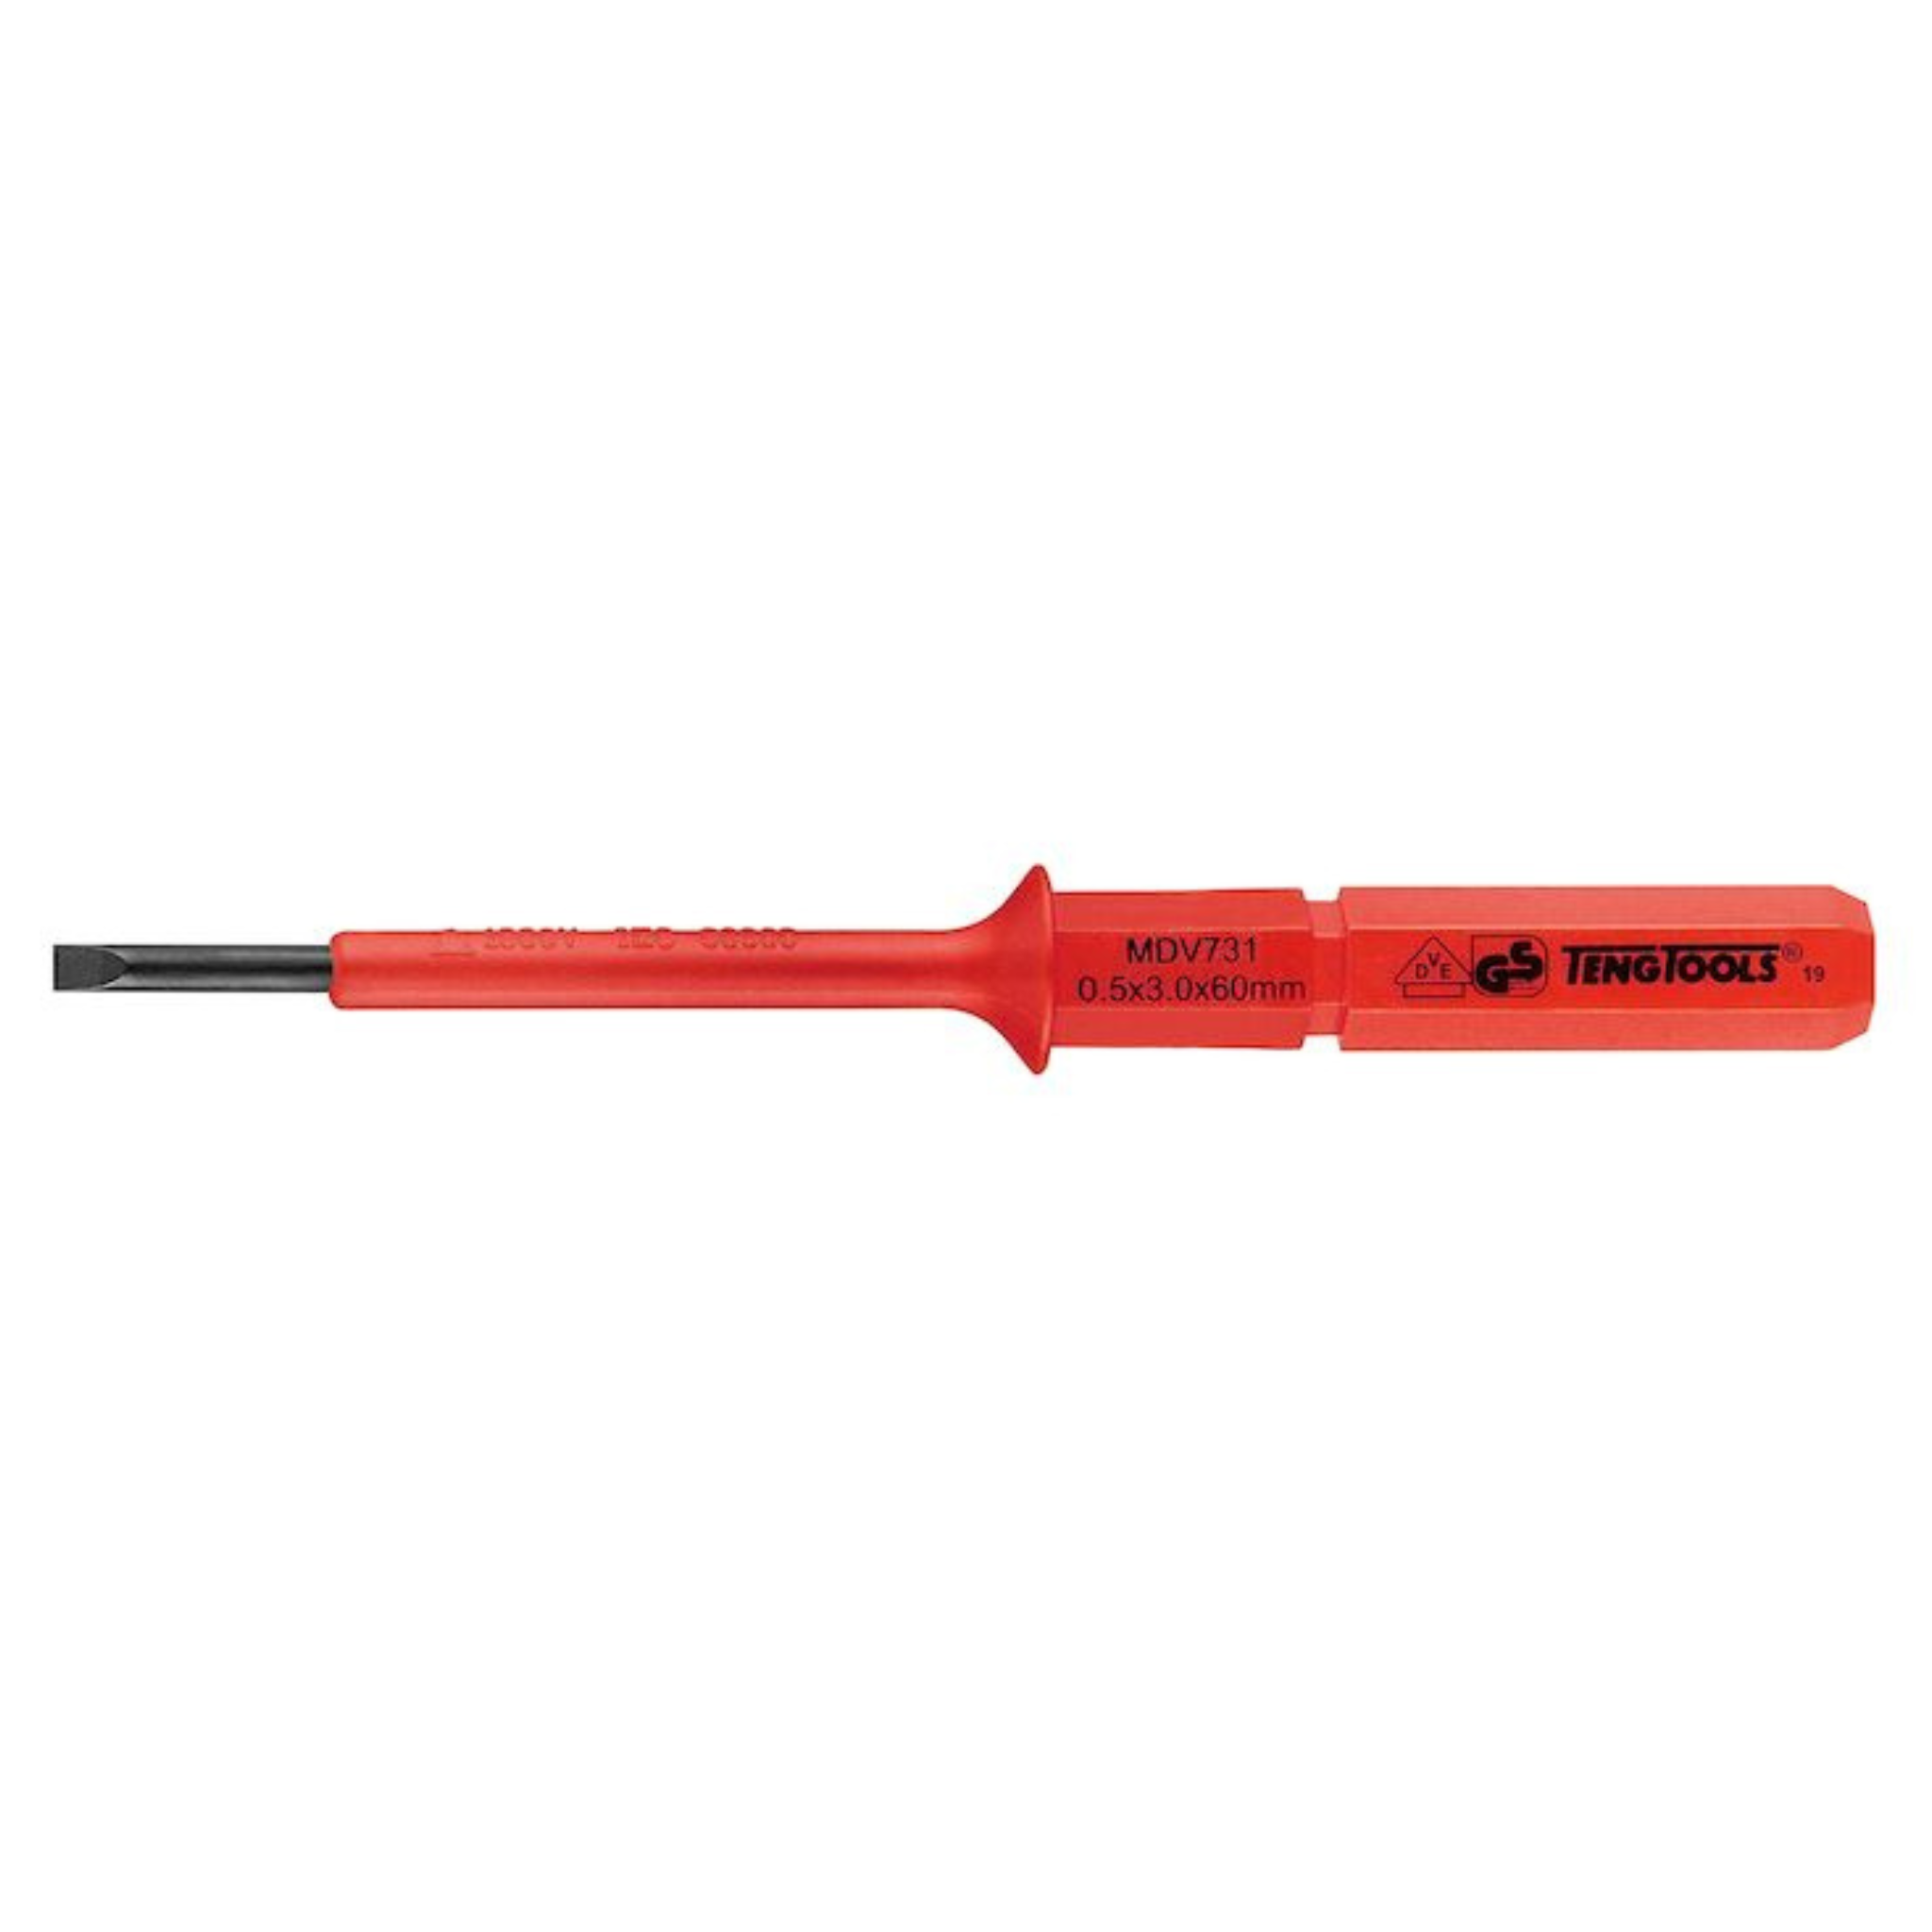 Teng Tools 1000 Volt Insulated Interchangeable Screwdriver Blades - 3mm Slotted